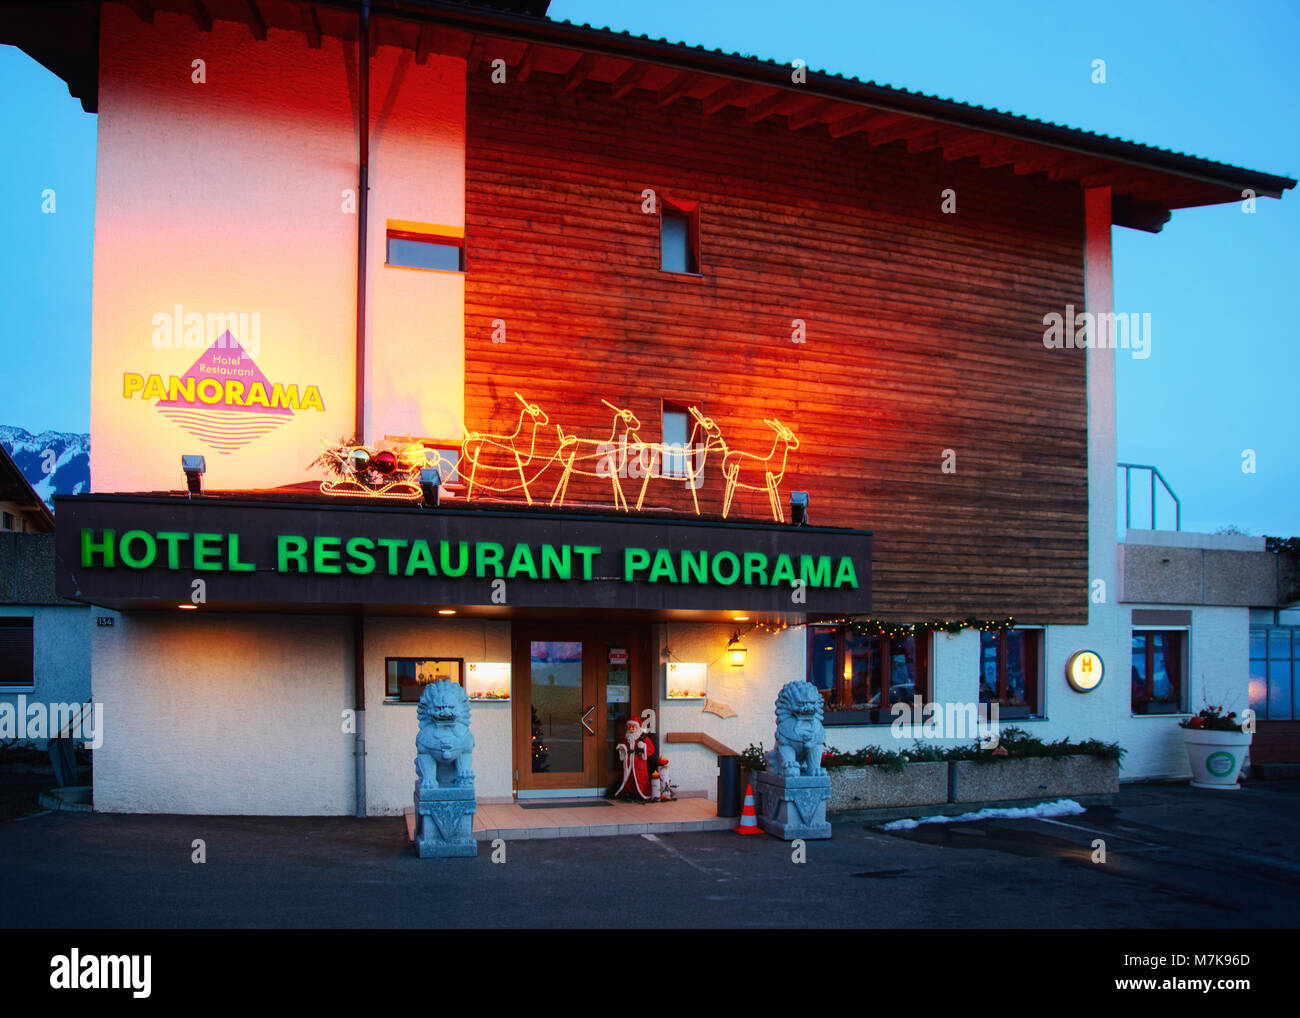 Sigrilwil, Switzerland - January 1, 2014: Hotel building placed at Swiss Alps mountains and Thun lake, Switzerland in winter. In the evening Stock Photo